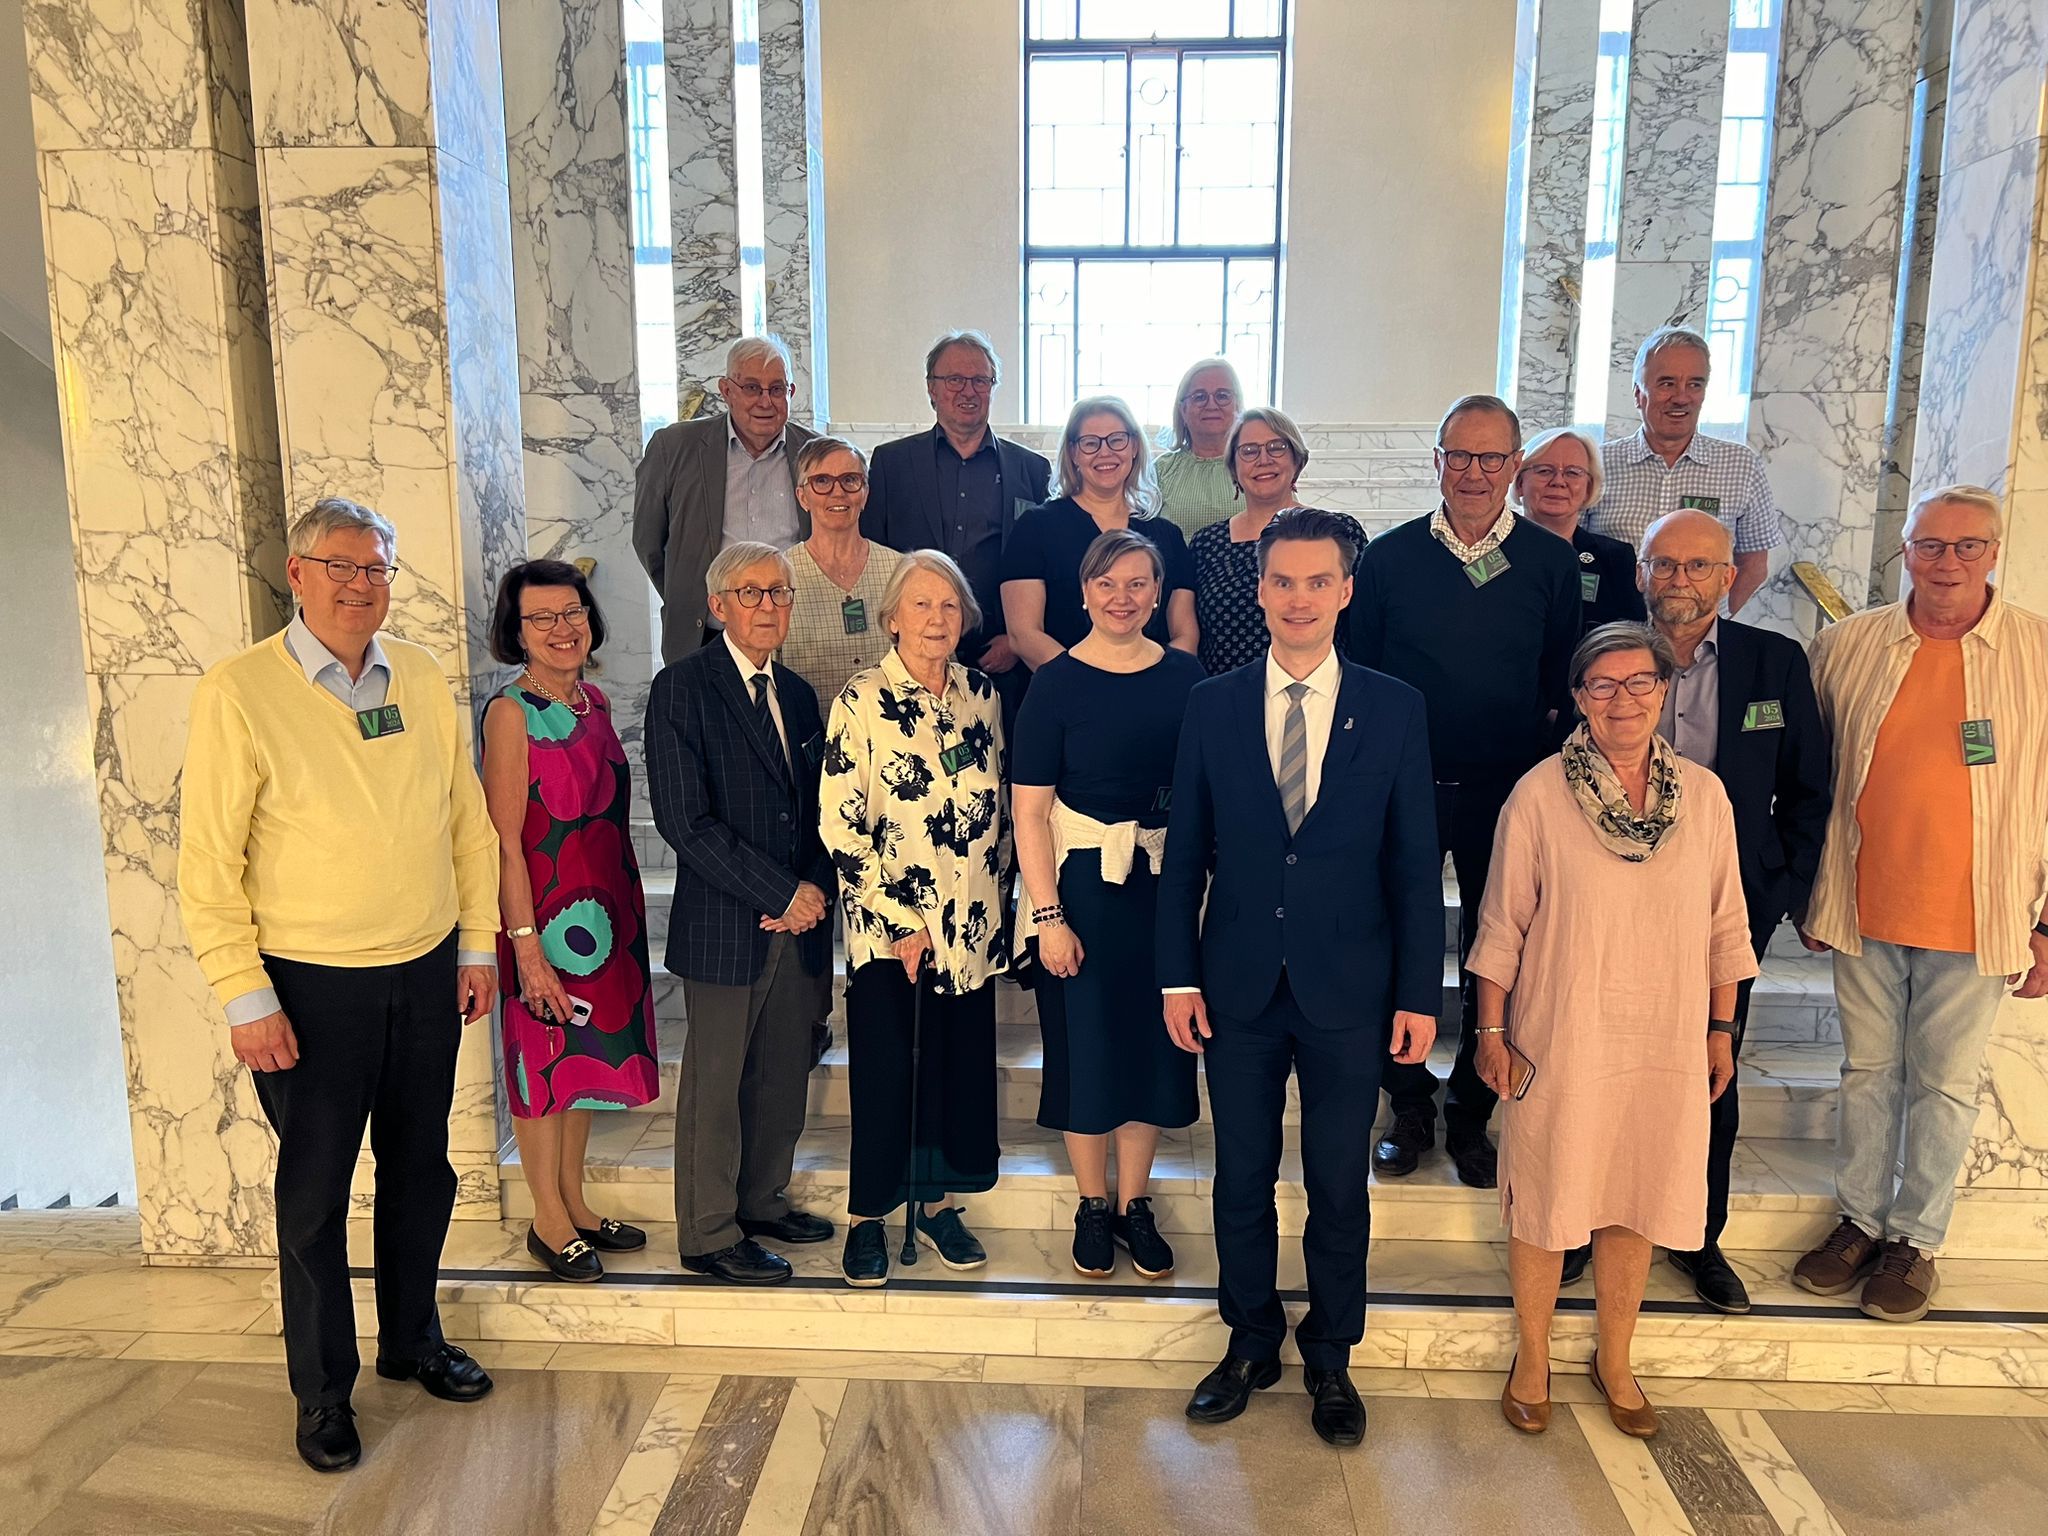 The trip to Helsinki started with a visit to the parliament. We listened to the question session, after which Rotary brother Heikki Autto introduced us to the parliament building. There were also sisters and brothers from the Rotary Club of Pasila.